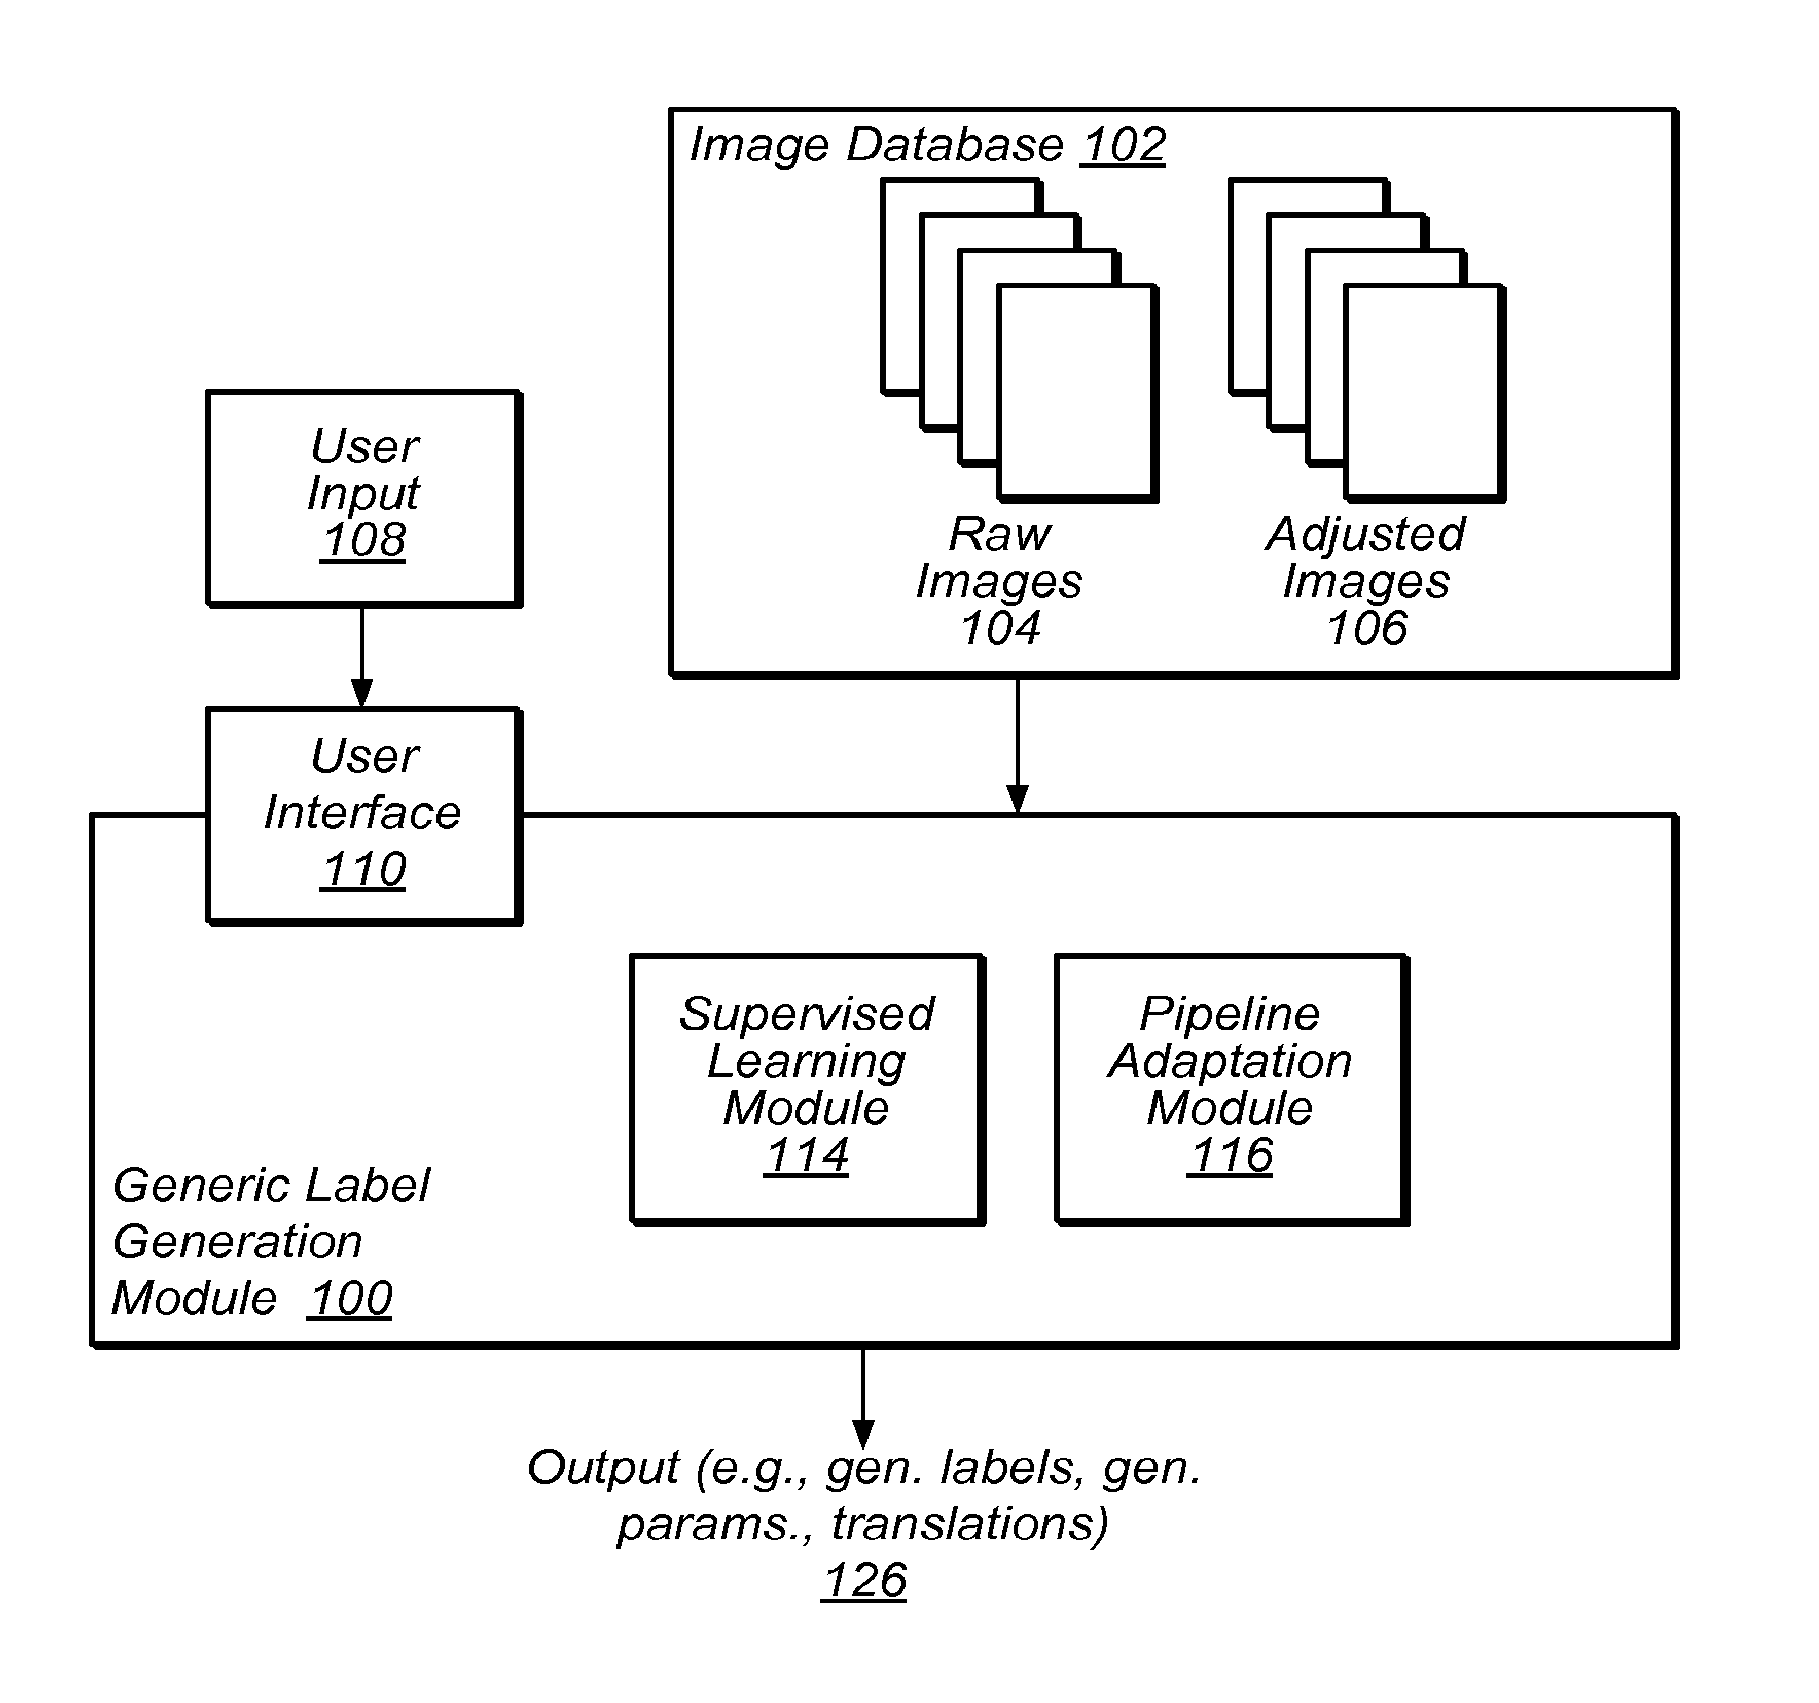 Automatic adaptation to image processing pipeline